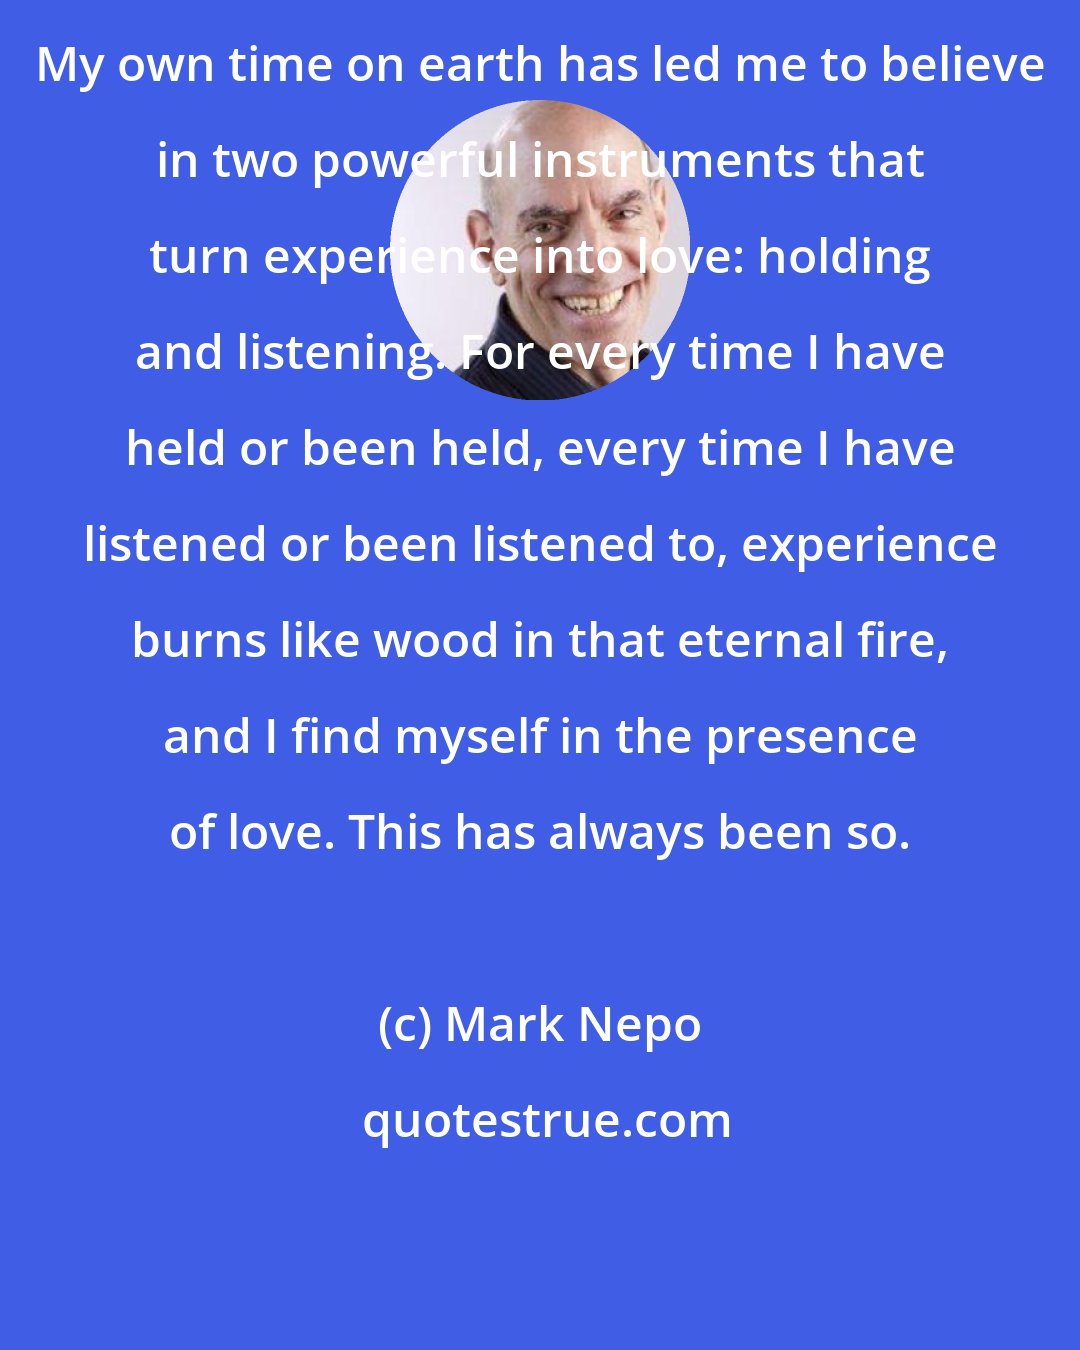 Mark Nepo: My own time on earth has led me to believe in two powerful instruments that turn experience into love: holding and listening. For every time I have held or been held, every time I have listened or been listened to, experience burns like wood in that eternal fire, and I find myself in the presence of love. This has always been so.